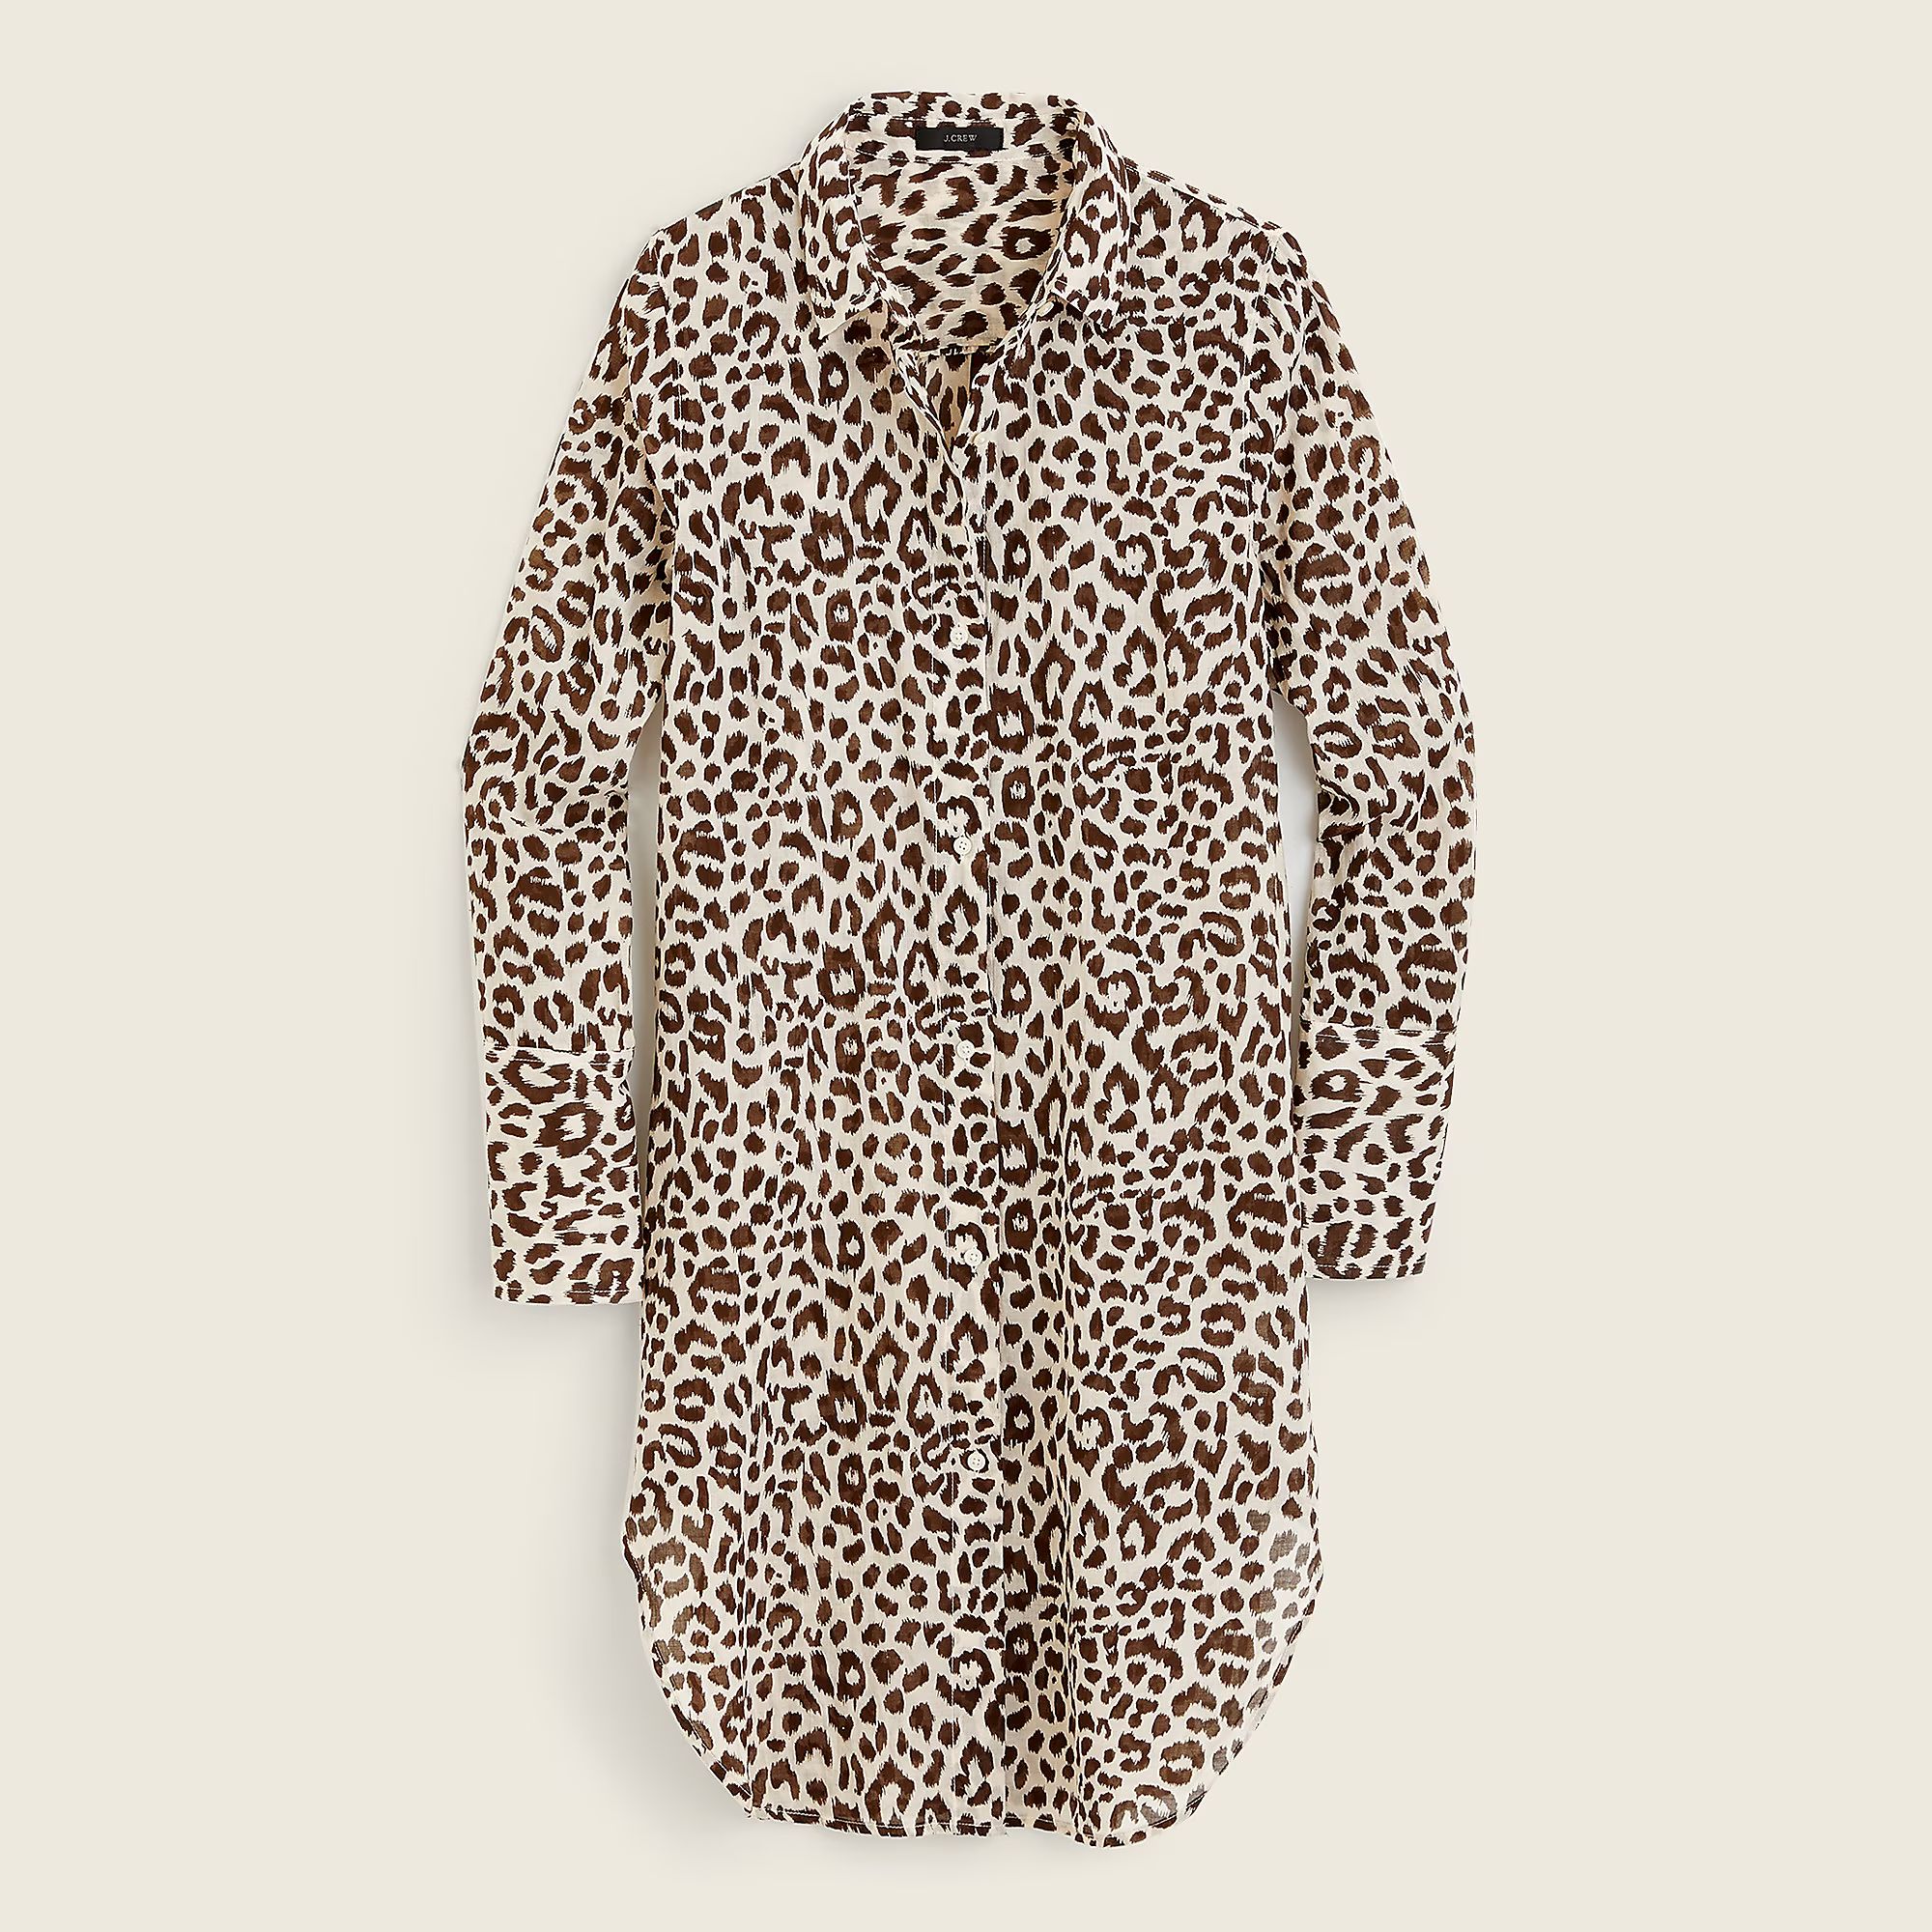 Beach cover-up in leopard | J.Crew US